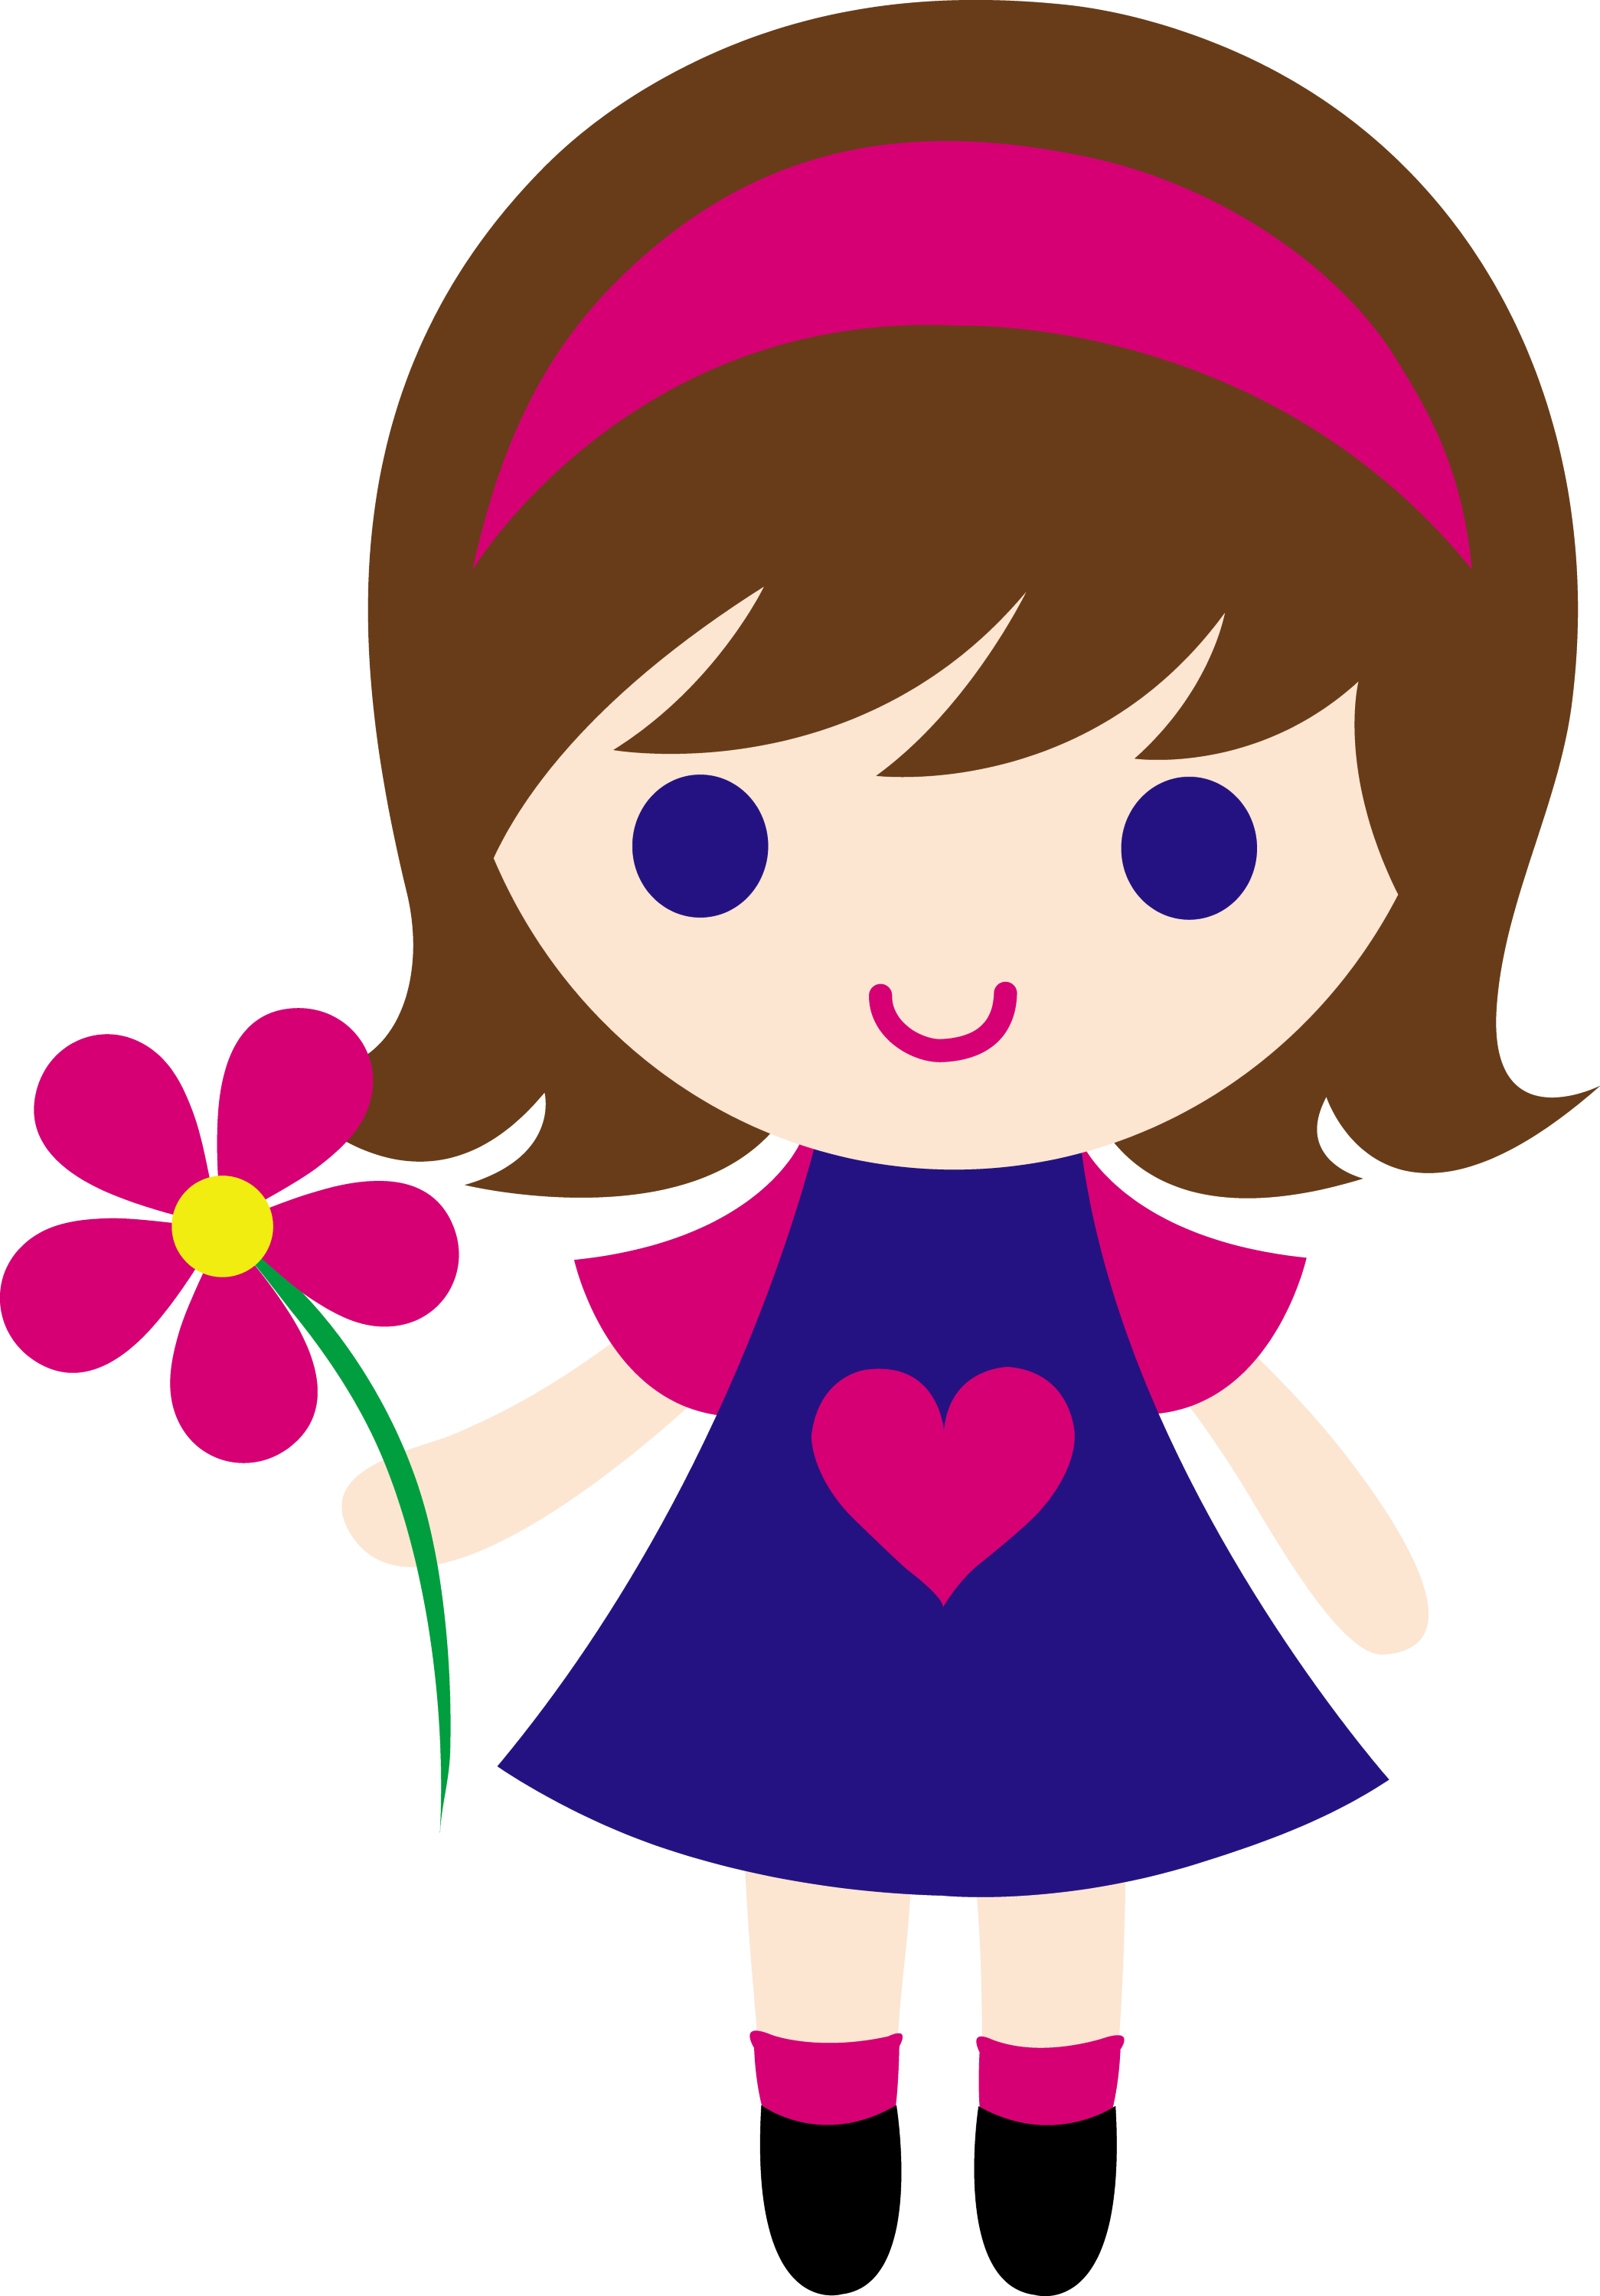 clip art girl pictures - photo #1